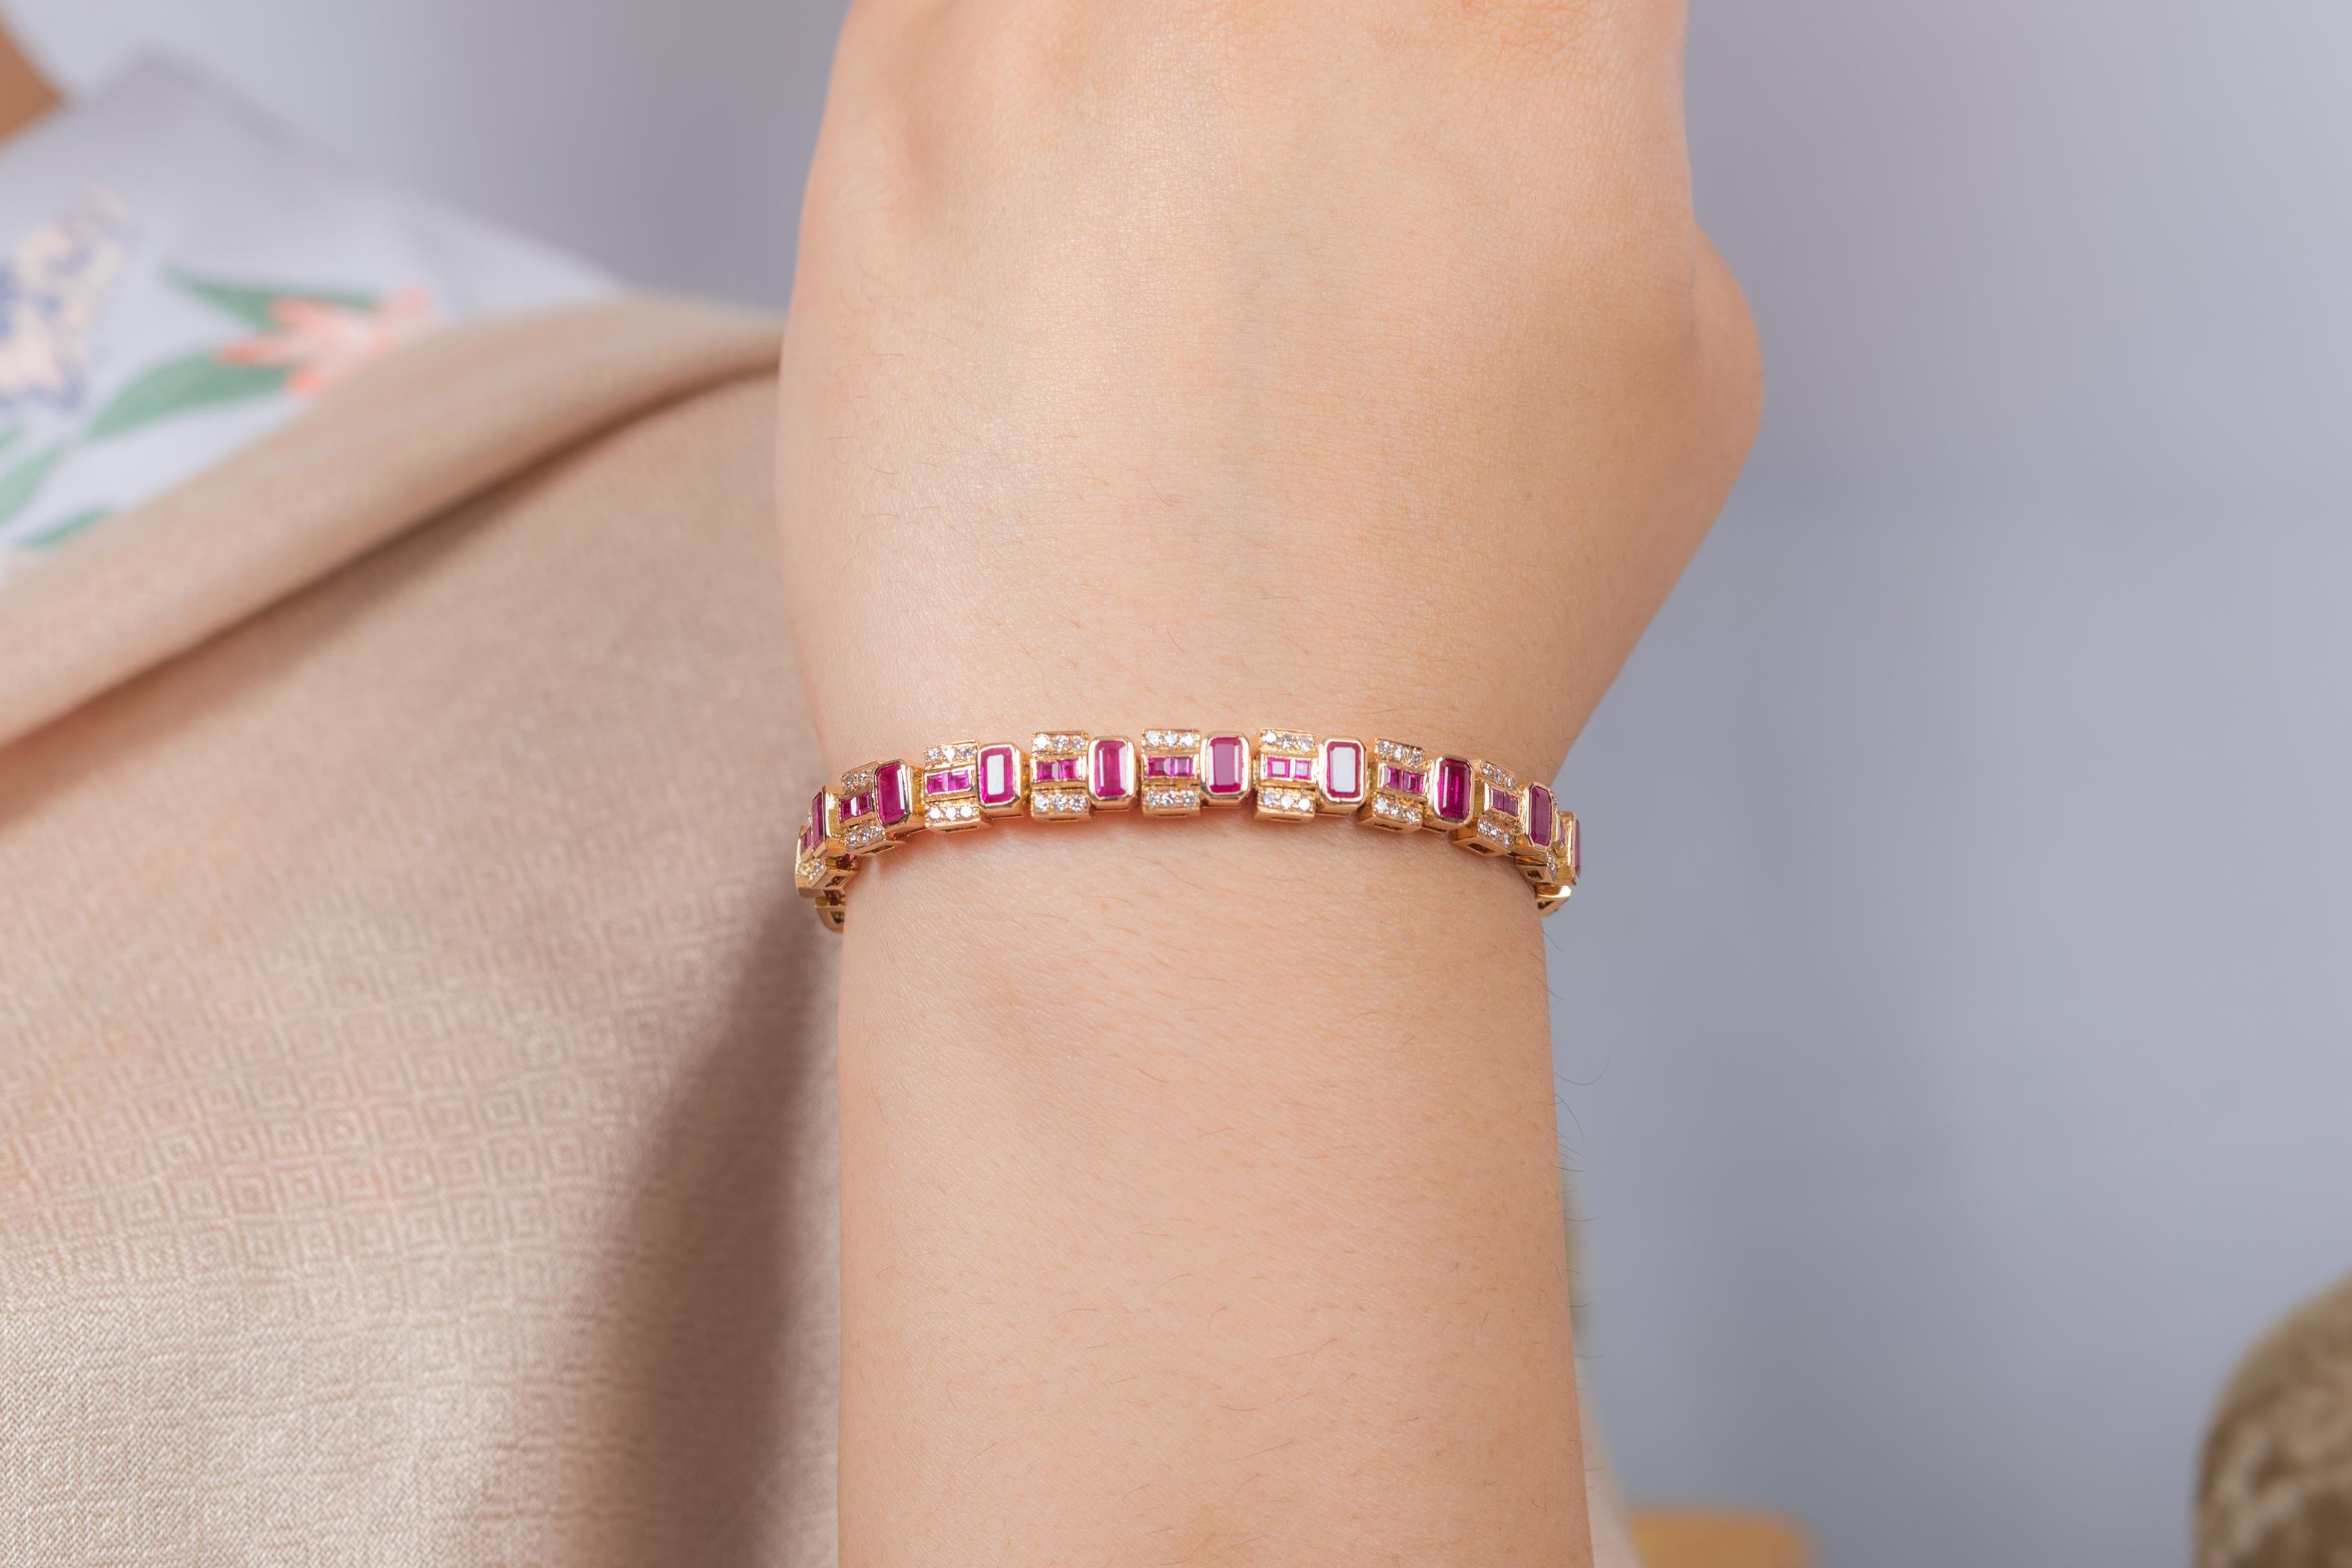 Bracelets are worn to enhance the look. Women love to look good. It is common to see a woman rocking a lovely gold bracelet on her wrist. A gold gemstone bracelet is the ultimate statement piece for every stylish woman.

A tennis bracelet is an